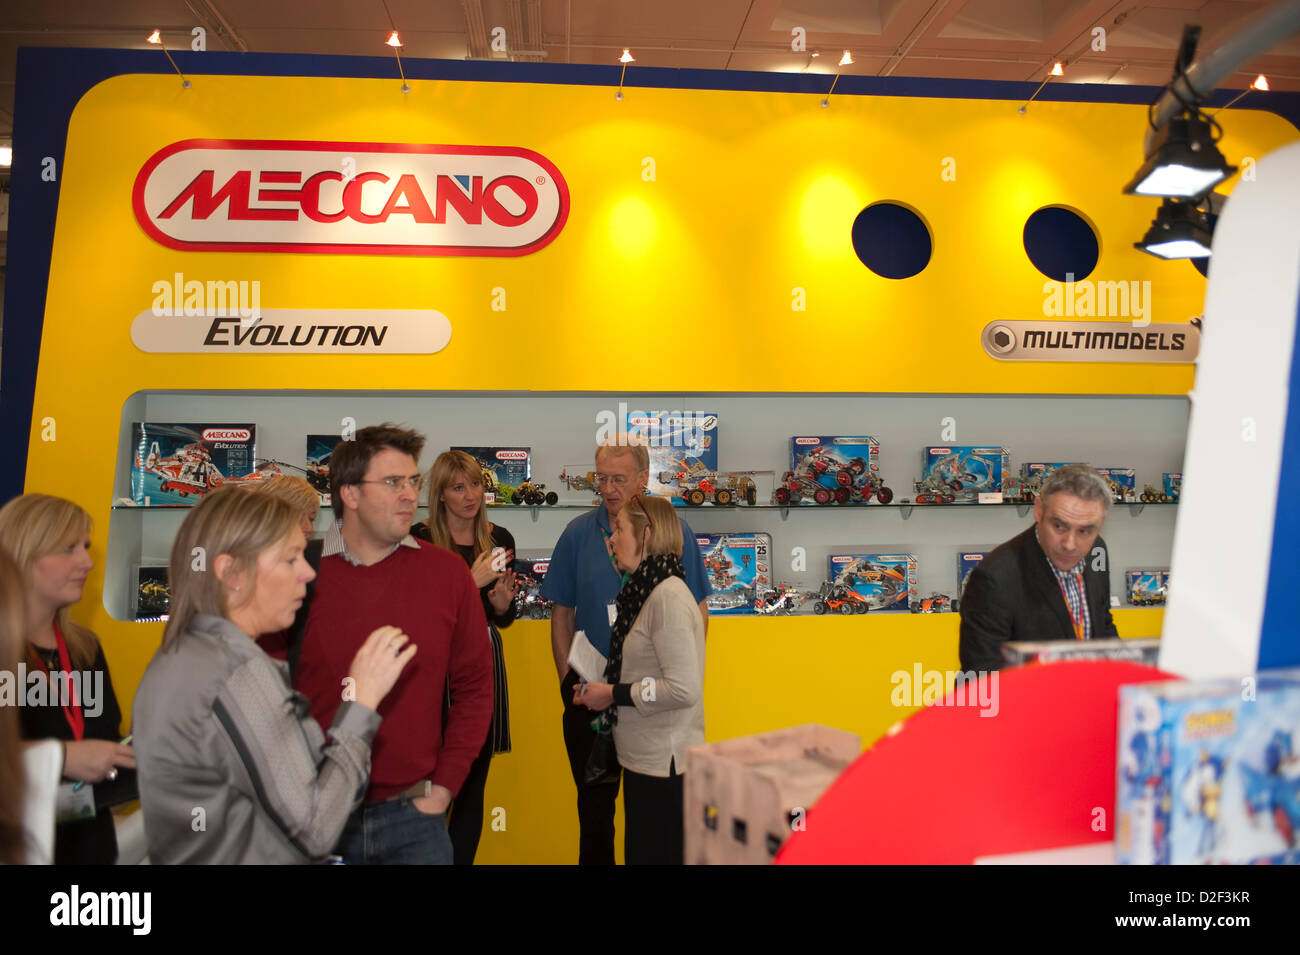 London, UK. 22nd January 2013. Organisers: The British Toy & Hobby Association. The Toy Fair opens today in the Grand Hall at Olympia, celebrating 60 years. Meccano stand. Credit: Malcolm Park/Alamy. Stock Photo